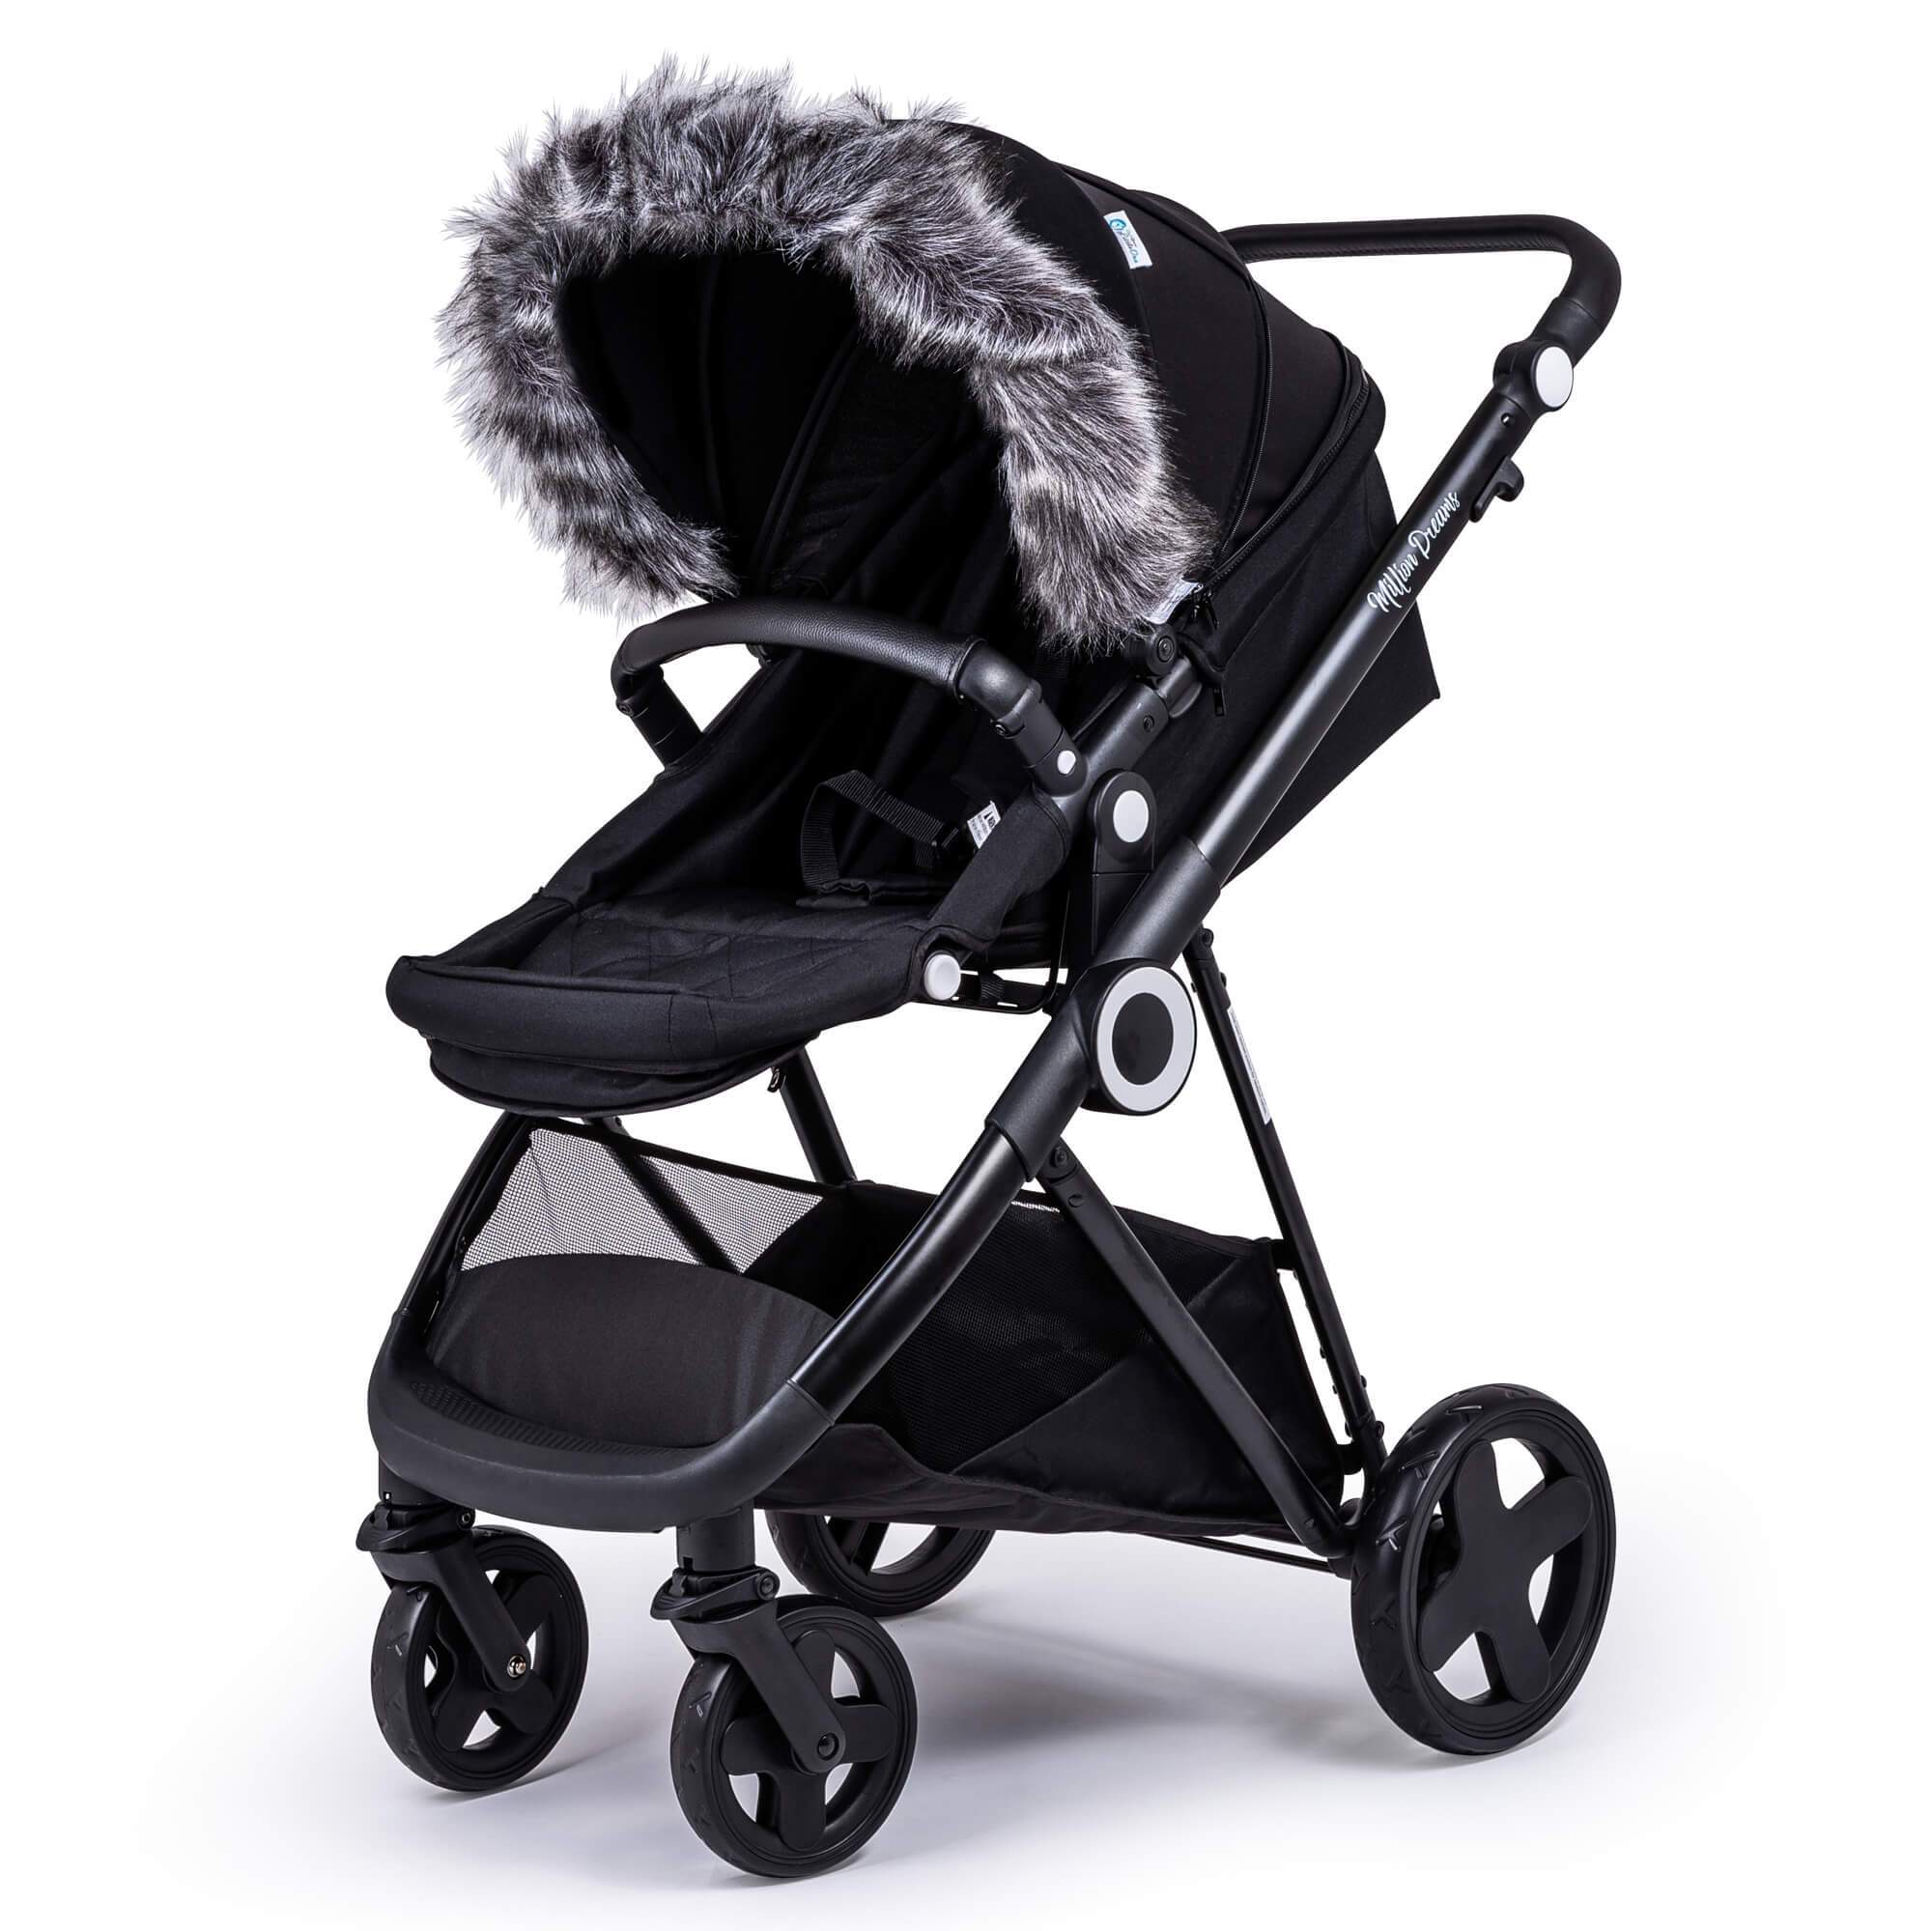 Pram Fur Hood Trim Attachment for Pushchair Compatible with Phil & Teds - Dark Grey / Fits All Models | For Your Little One